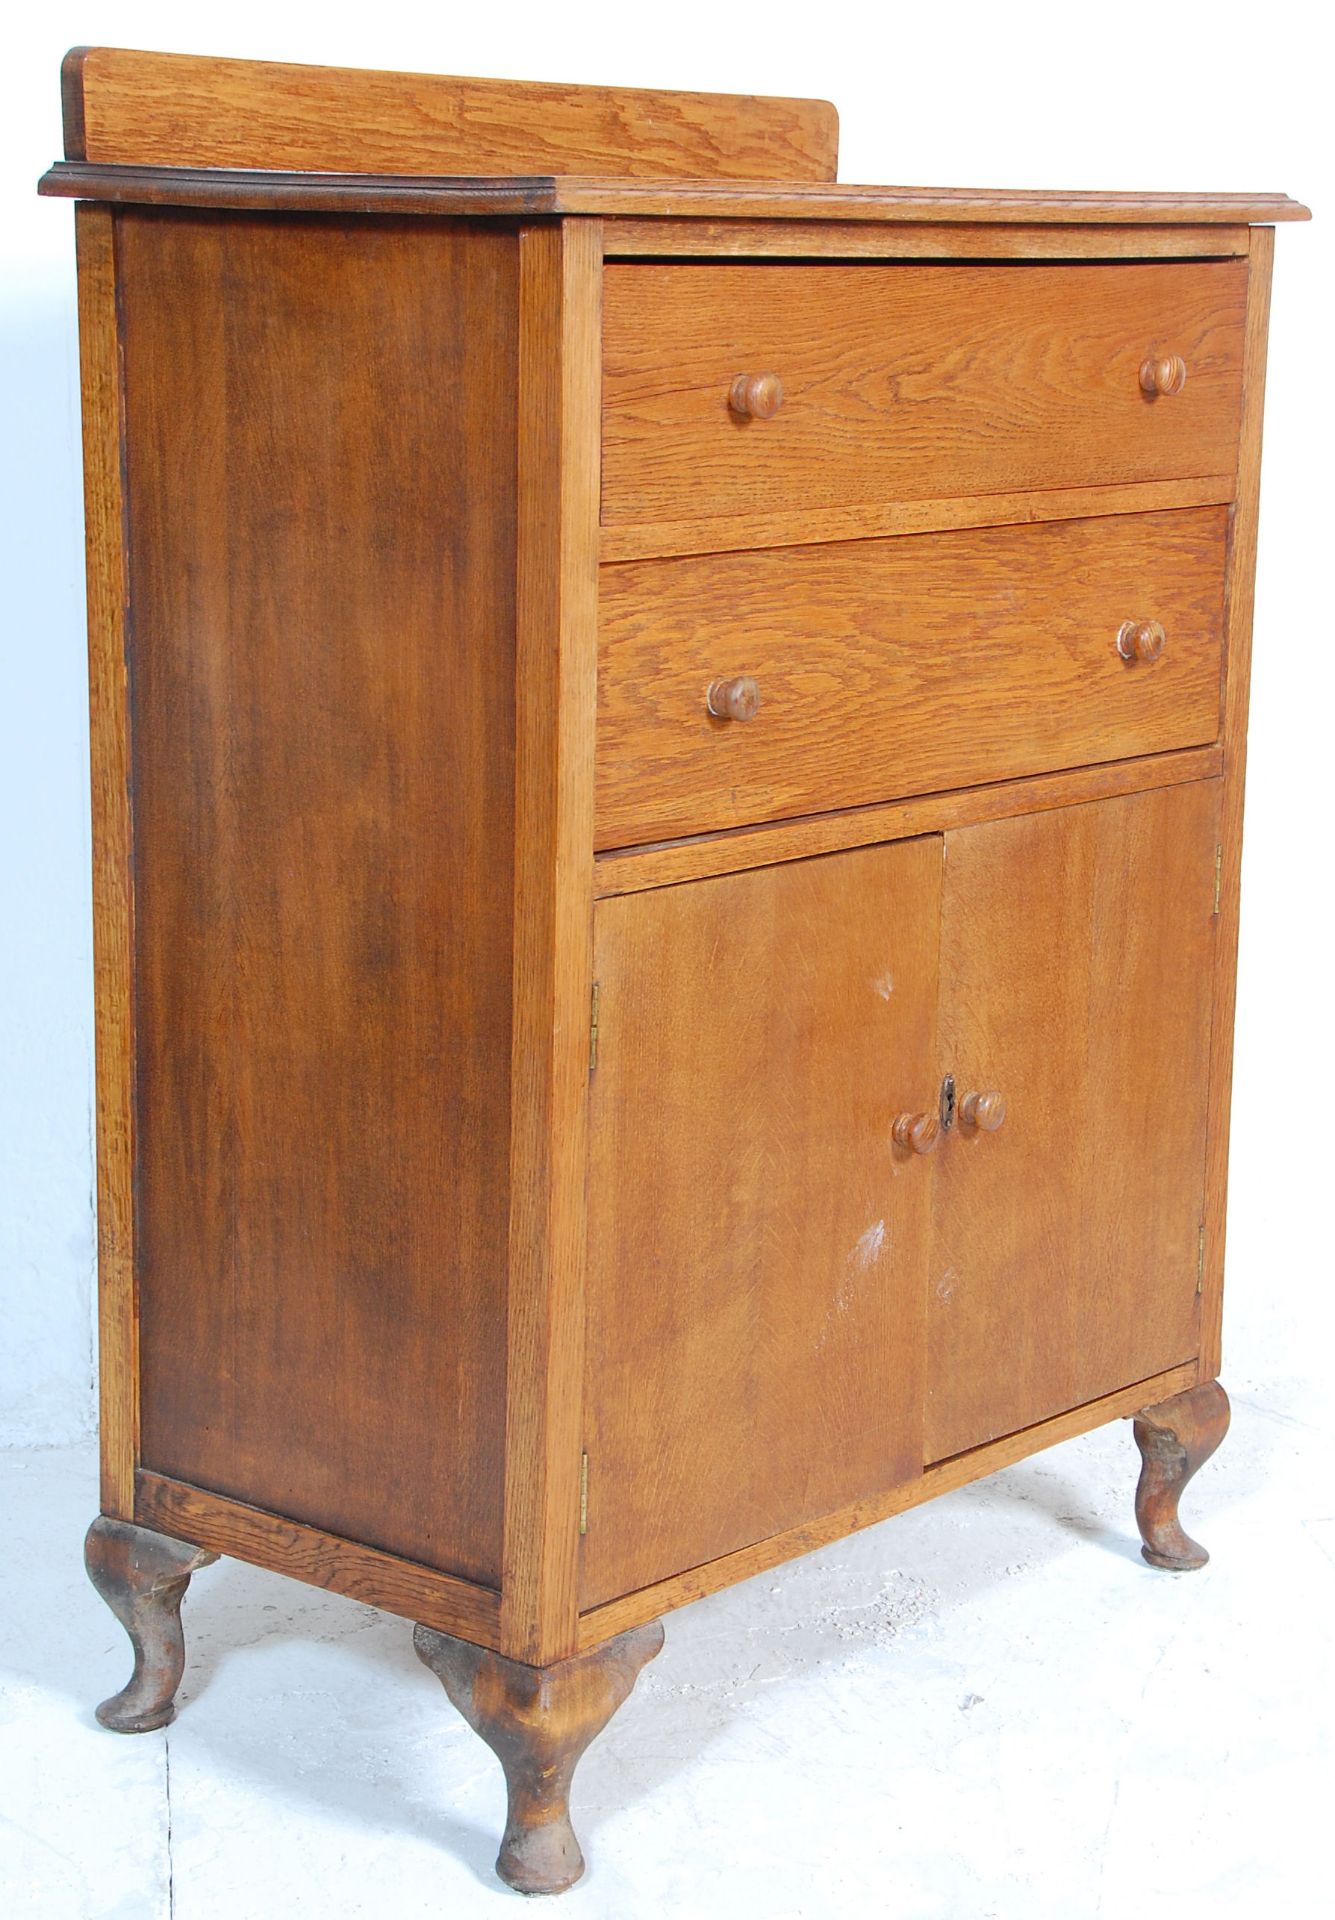 A early 20th Century oak tallboy chest of drawers - linen cupboard. The tallboy having two drawers